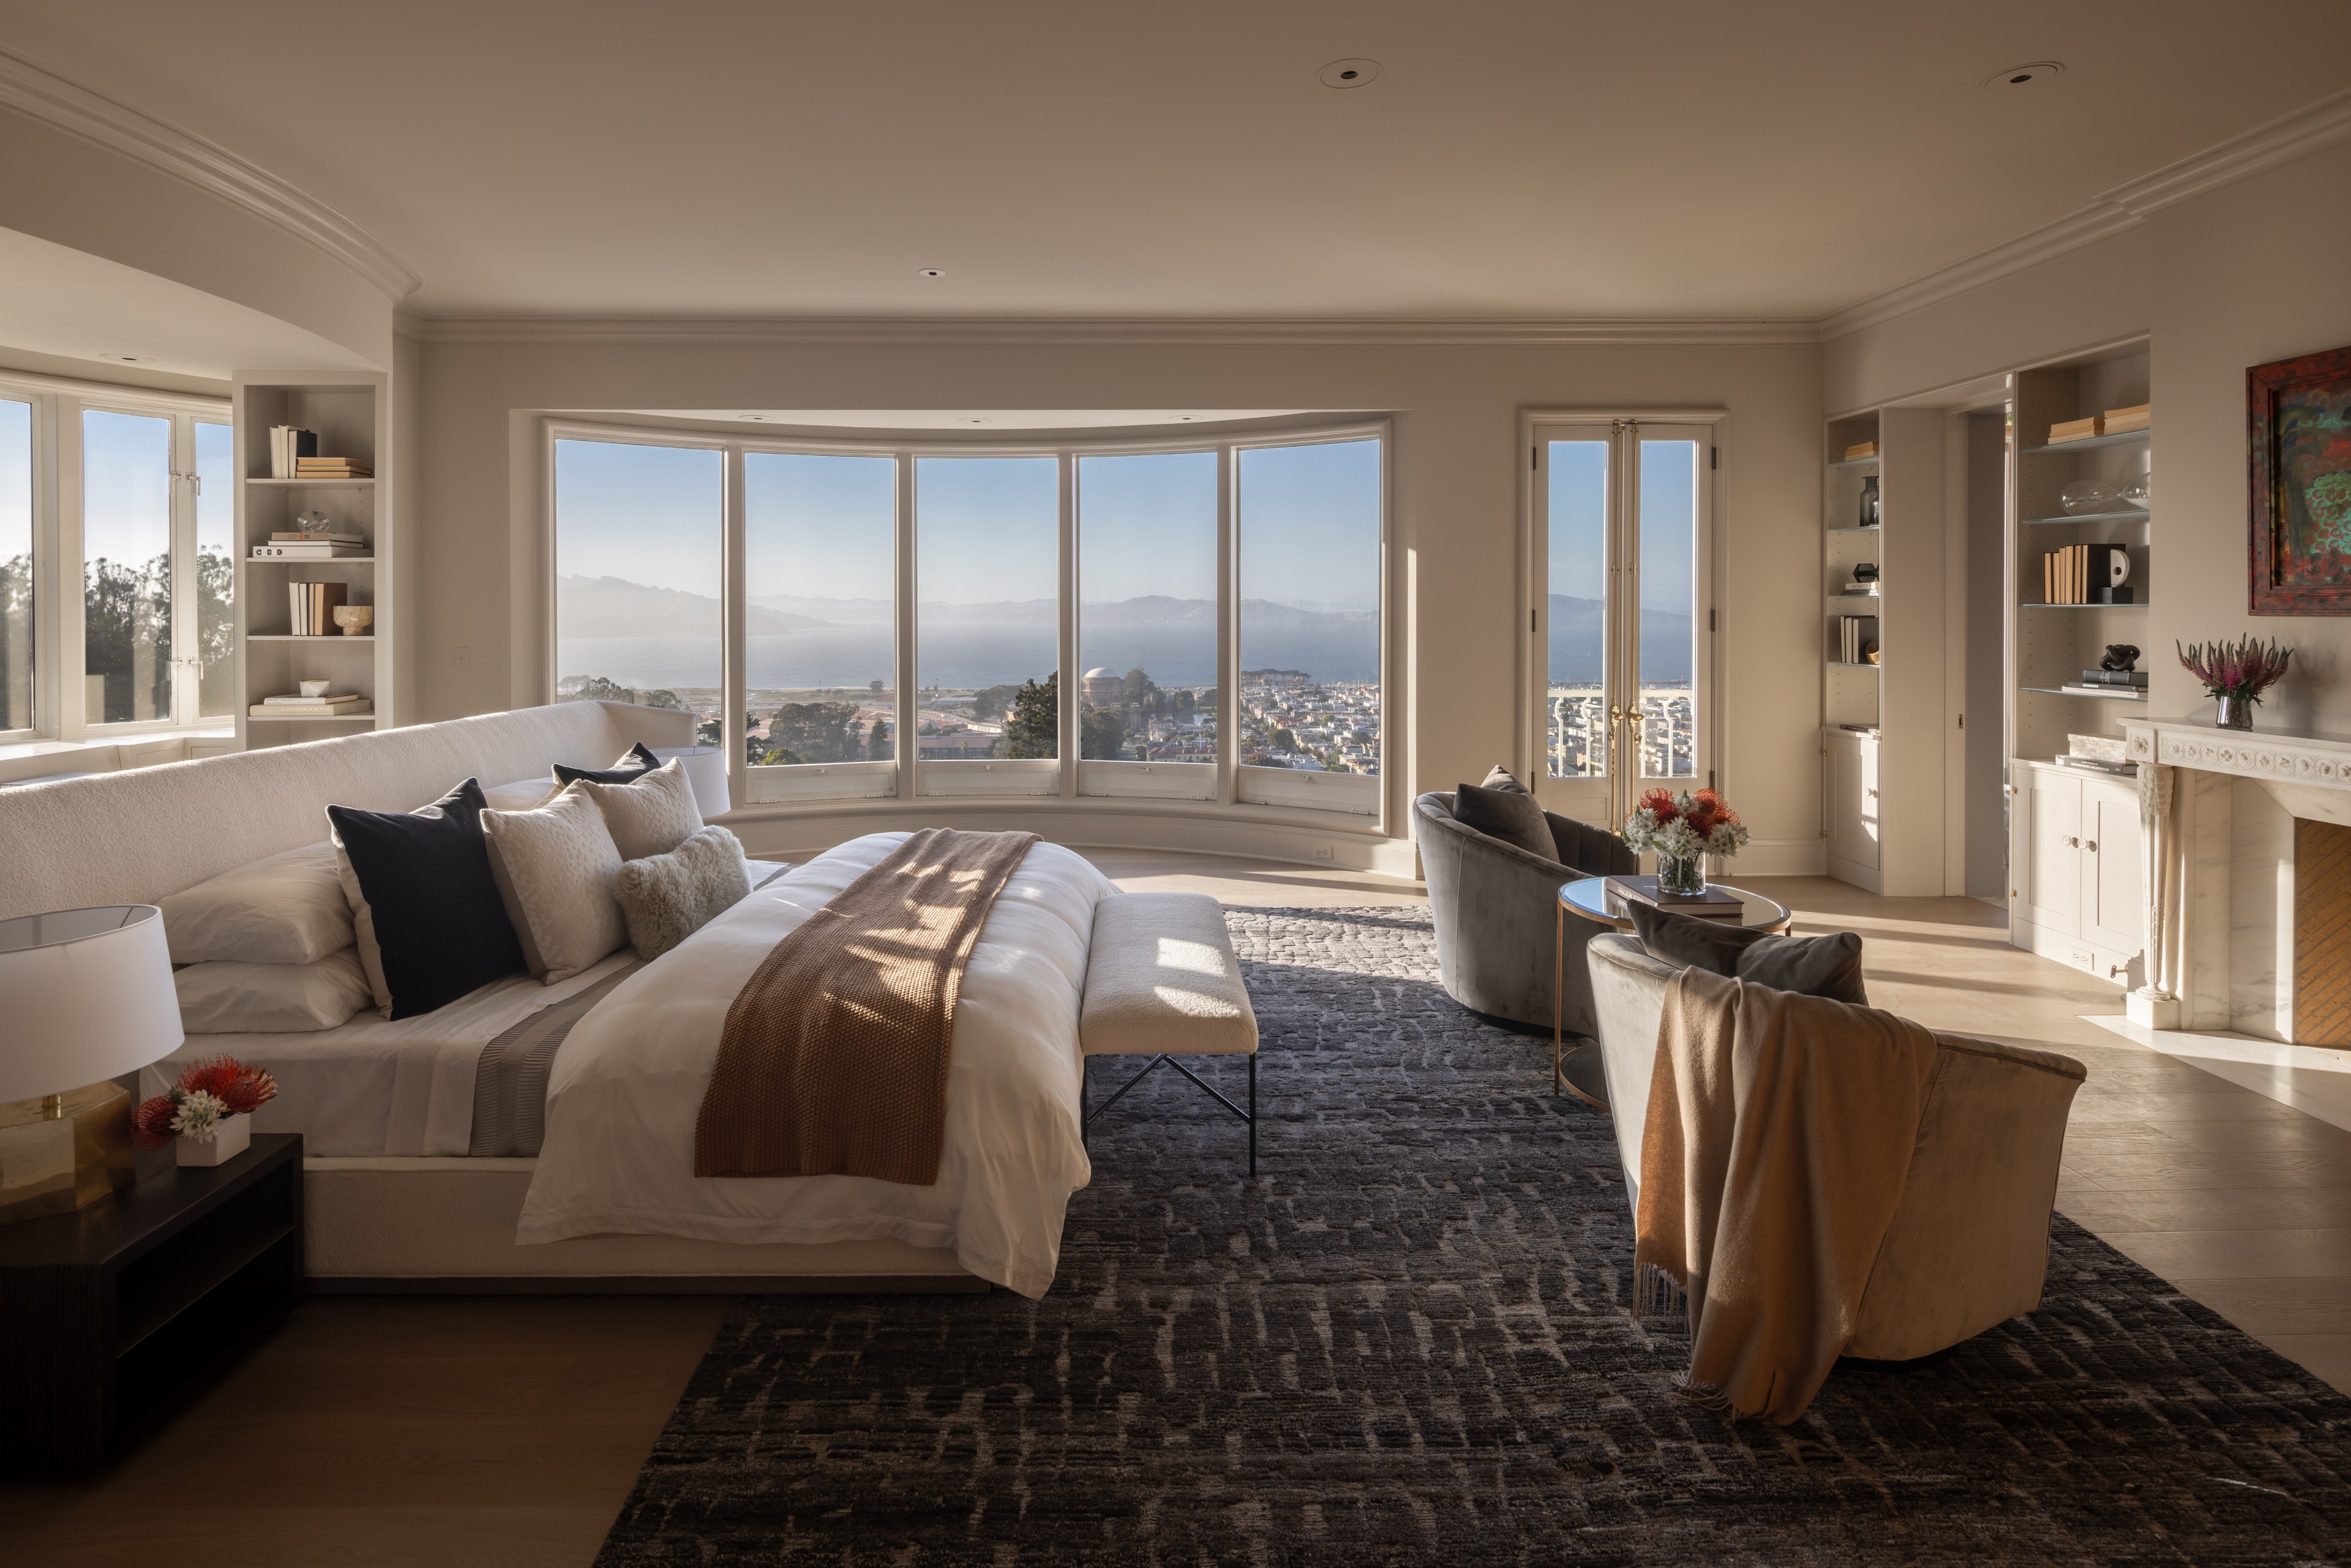 A spacious bedroom features a large bed facing wide windows with a scenic city and water view. It includes cozy seating, a fireplace, built-in shelves, and elegant decor.